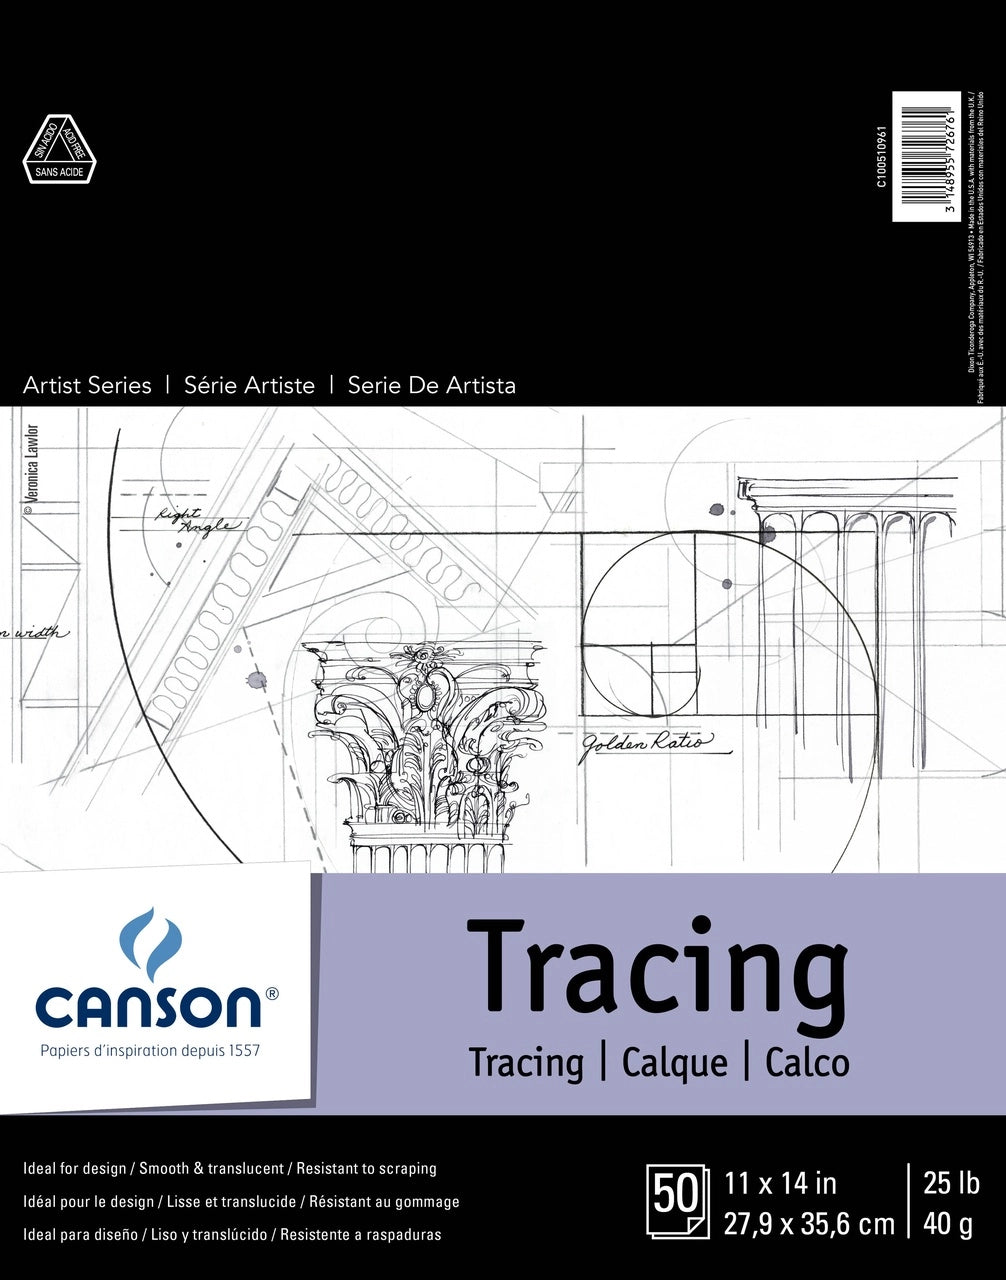 Canson Artist Tracing Pads #25 11X14